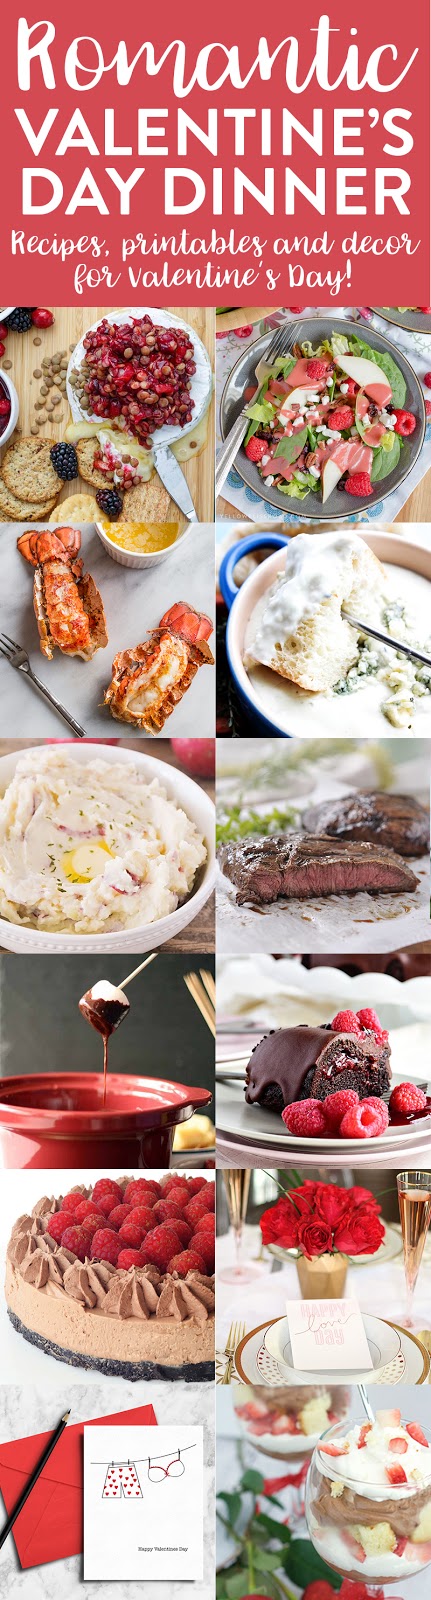 This Valentine's Day Meal Plan has got everything you need to make Valentine's Day a night to remember. From appetizers, to desserts, to printables and party ideas, we've got you covered!